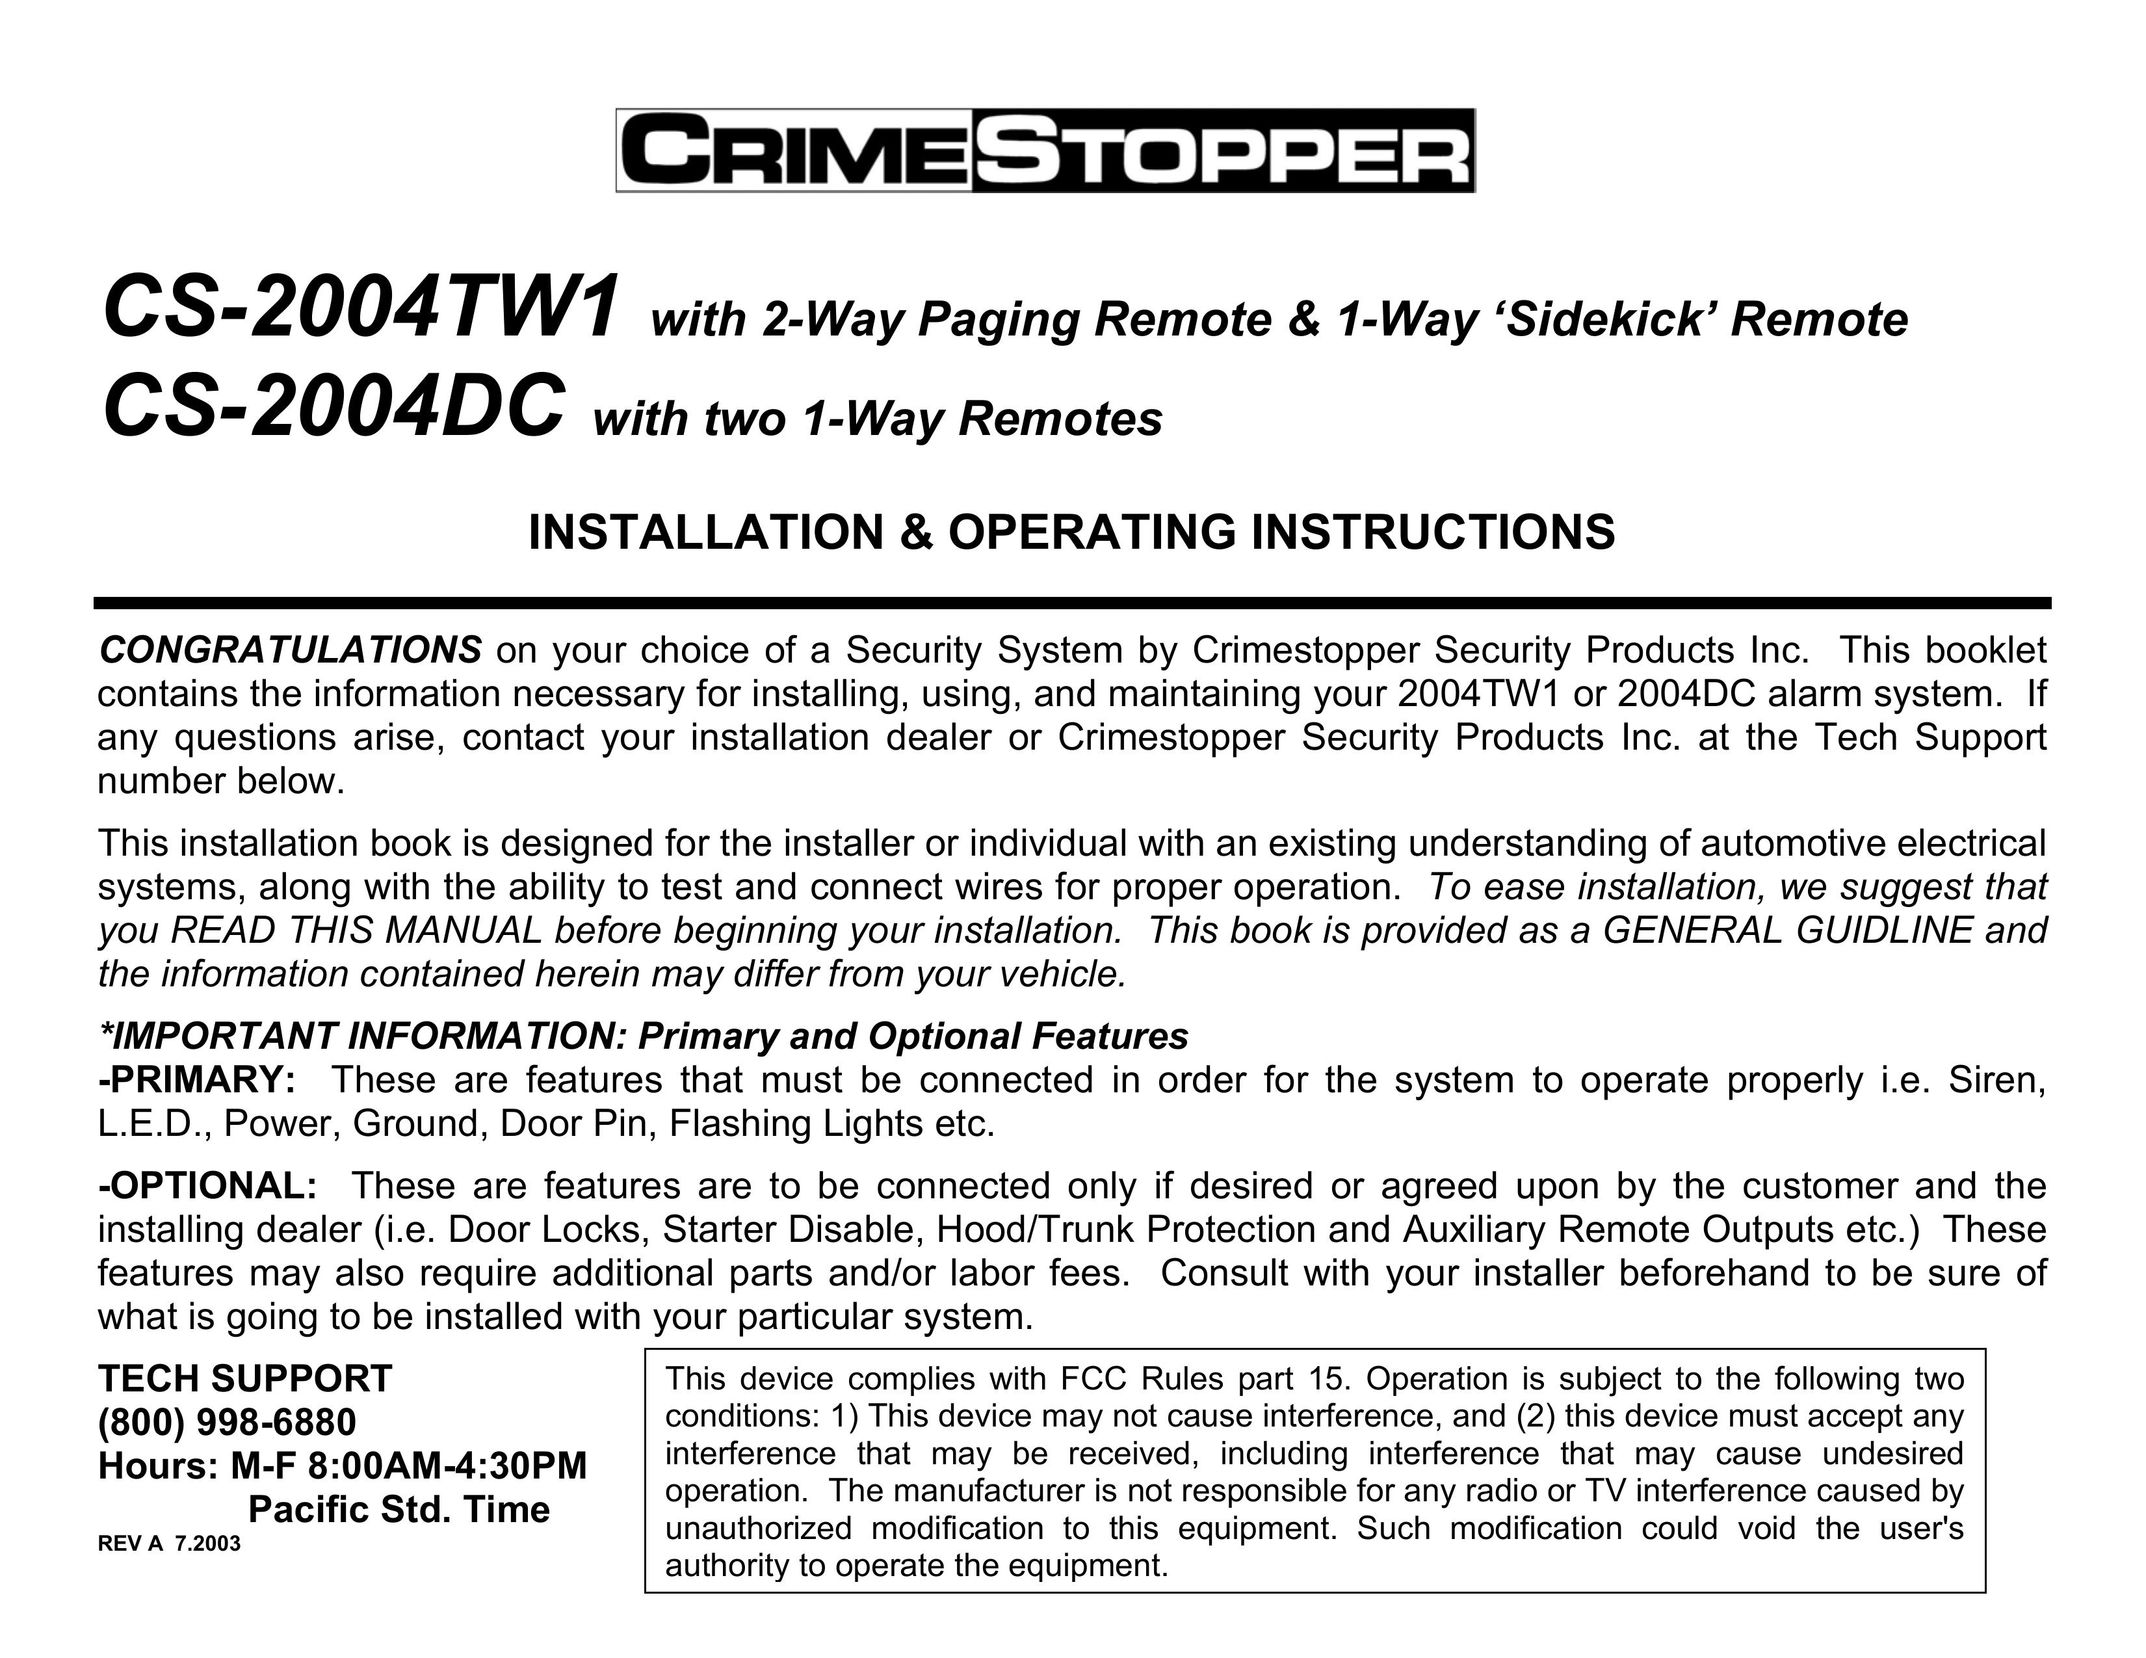 Crimestopper Security Products CS-2004TW1 Home Security System User Manual